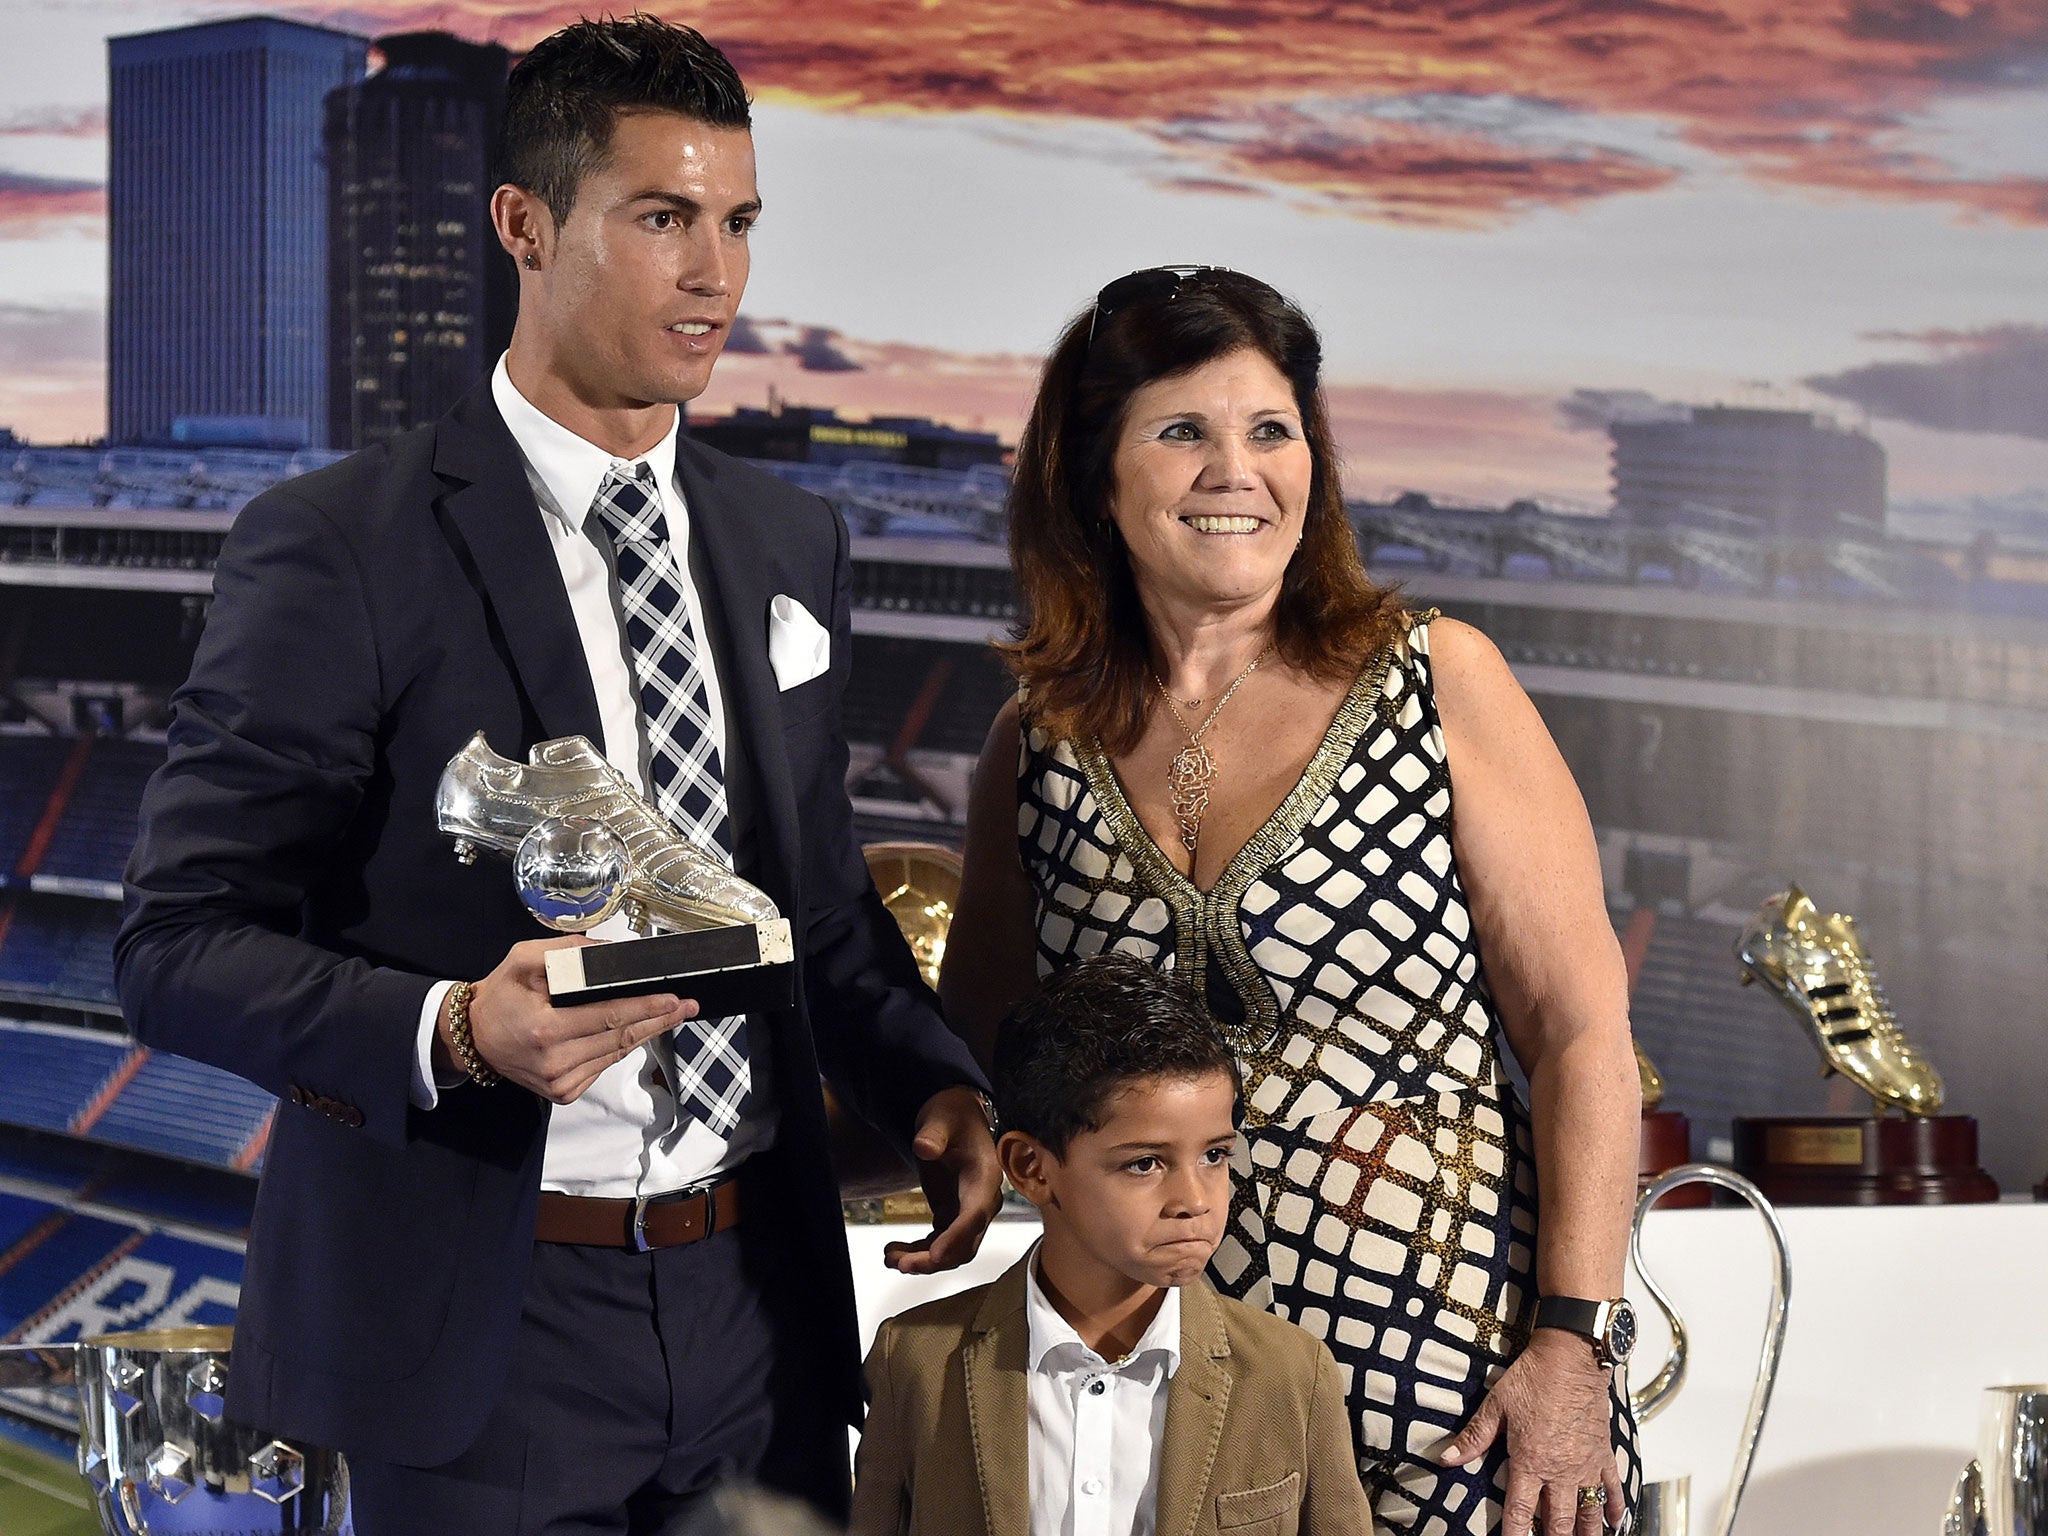 Like Father Like Son - 5 Of The Best Ronaldo & Son Looks